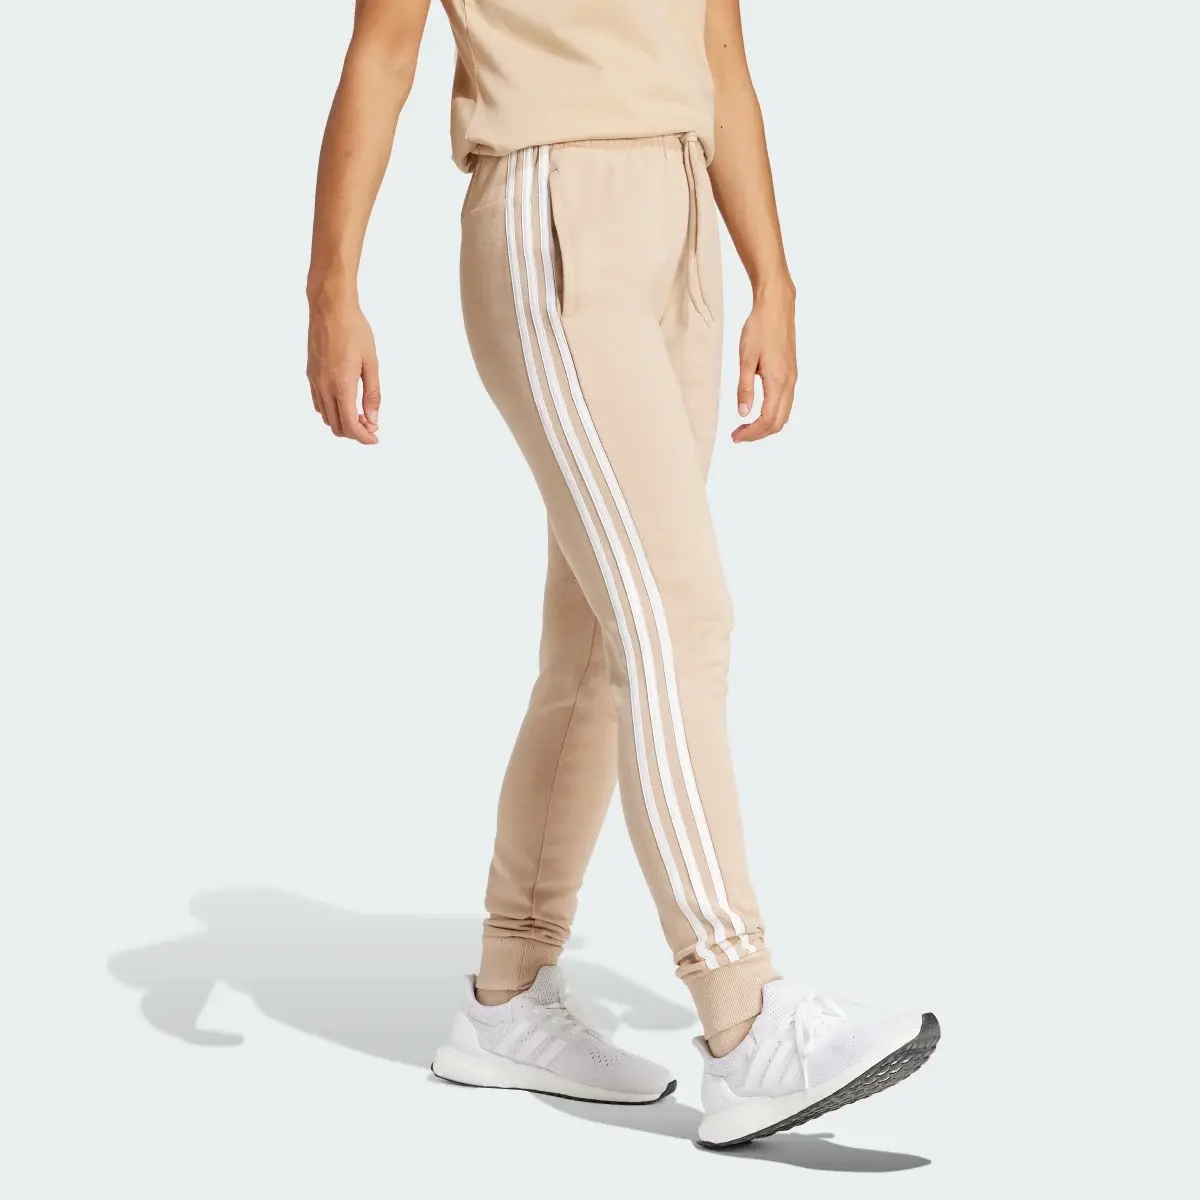 Adidas Essentials 3-Stripes French Terry Cuffed Pants. 3